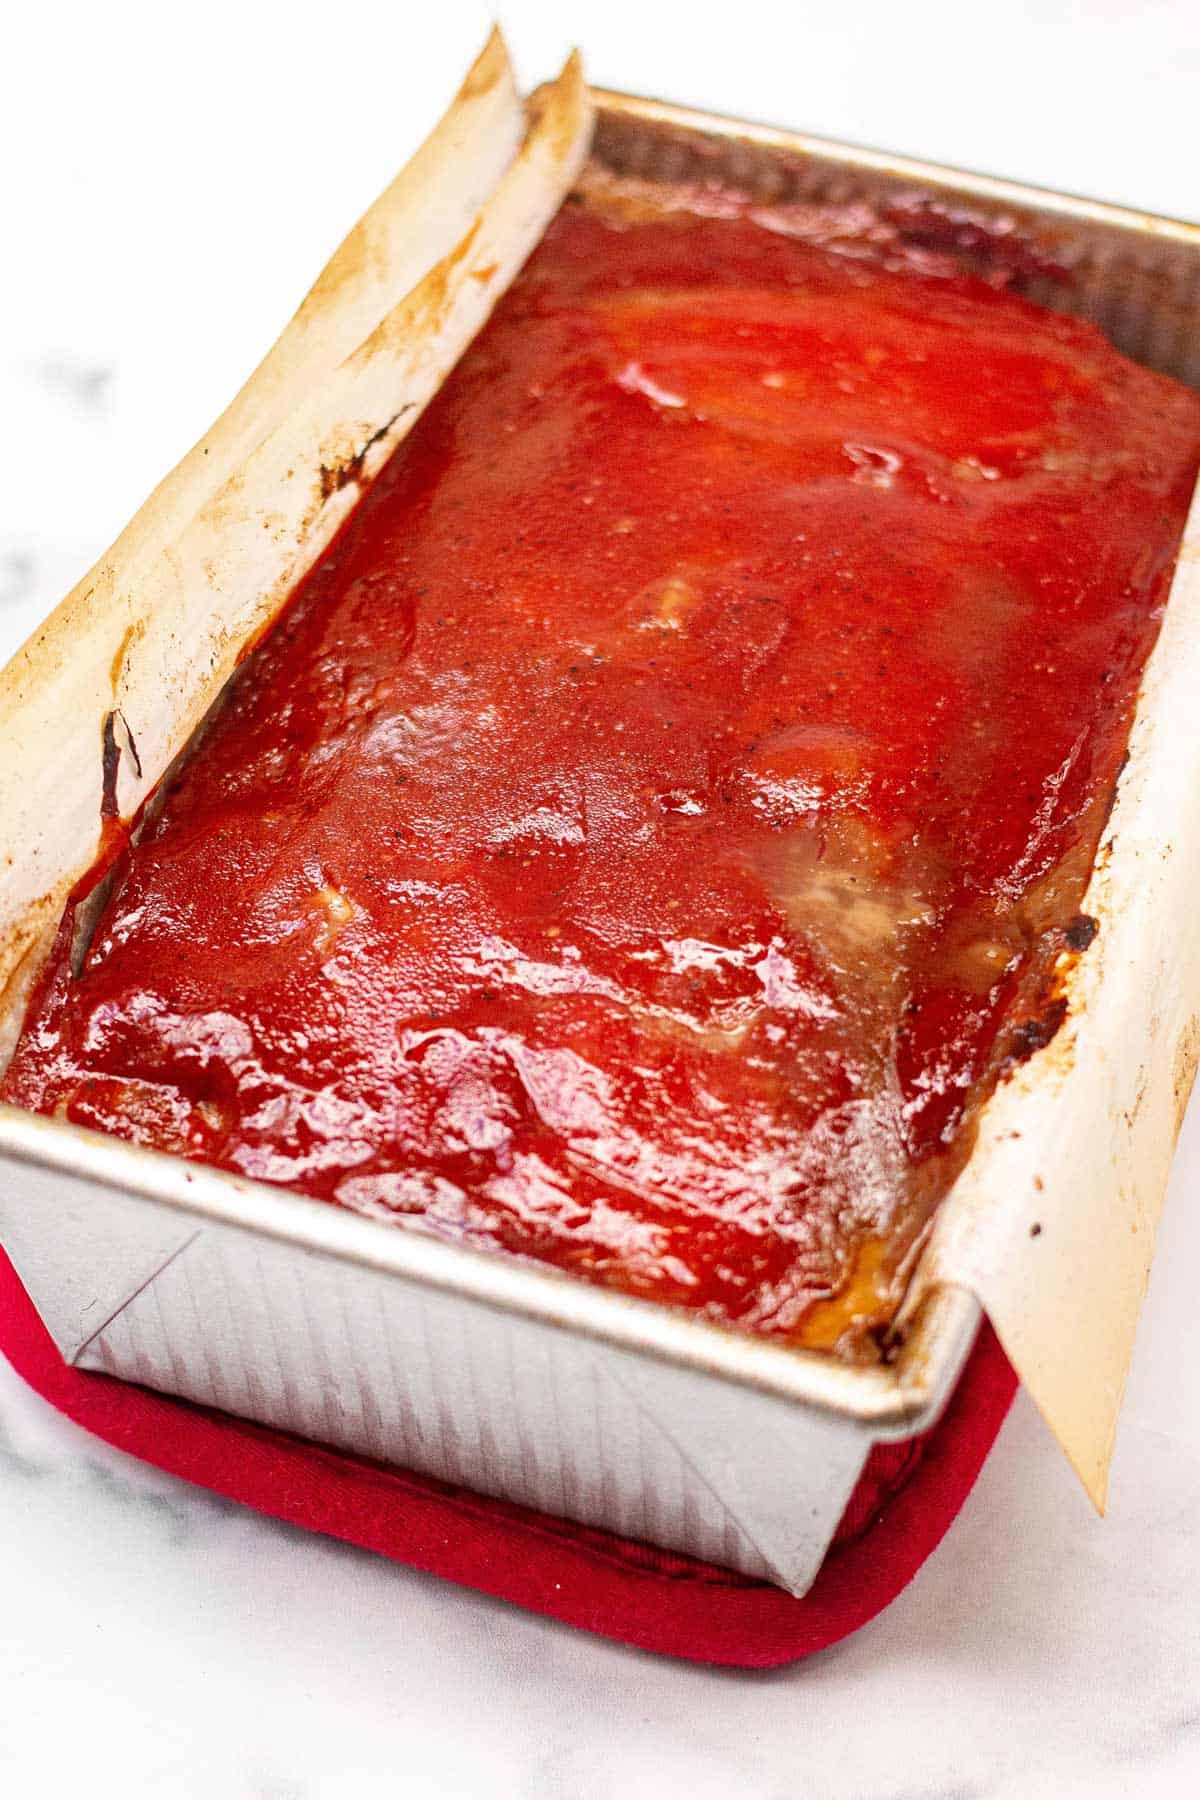 Baked meatloaf covered in ketchup glaze in a loaf pan sitting on a hot mitt. The parchment is yellowed from baking.